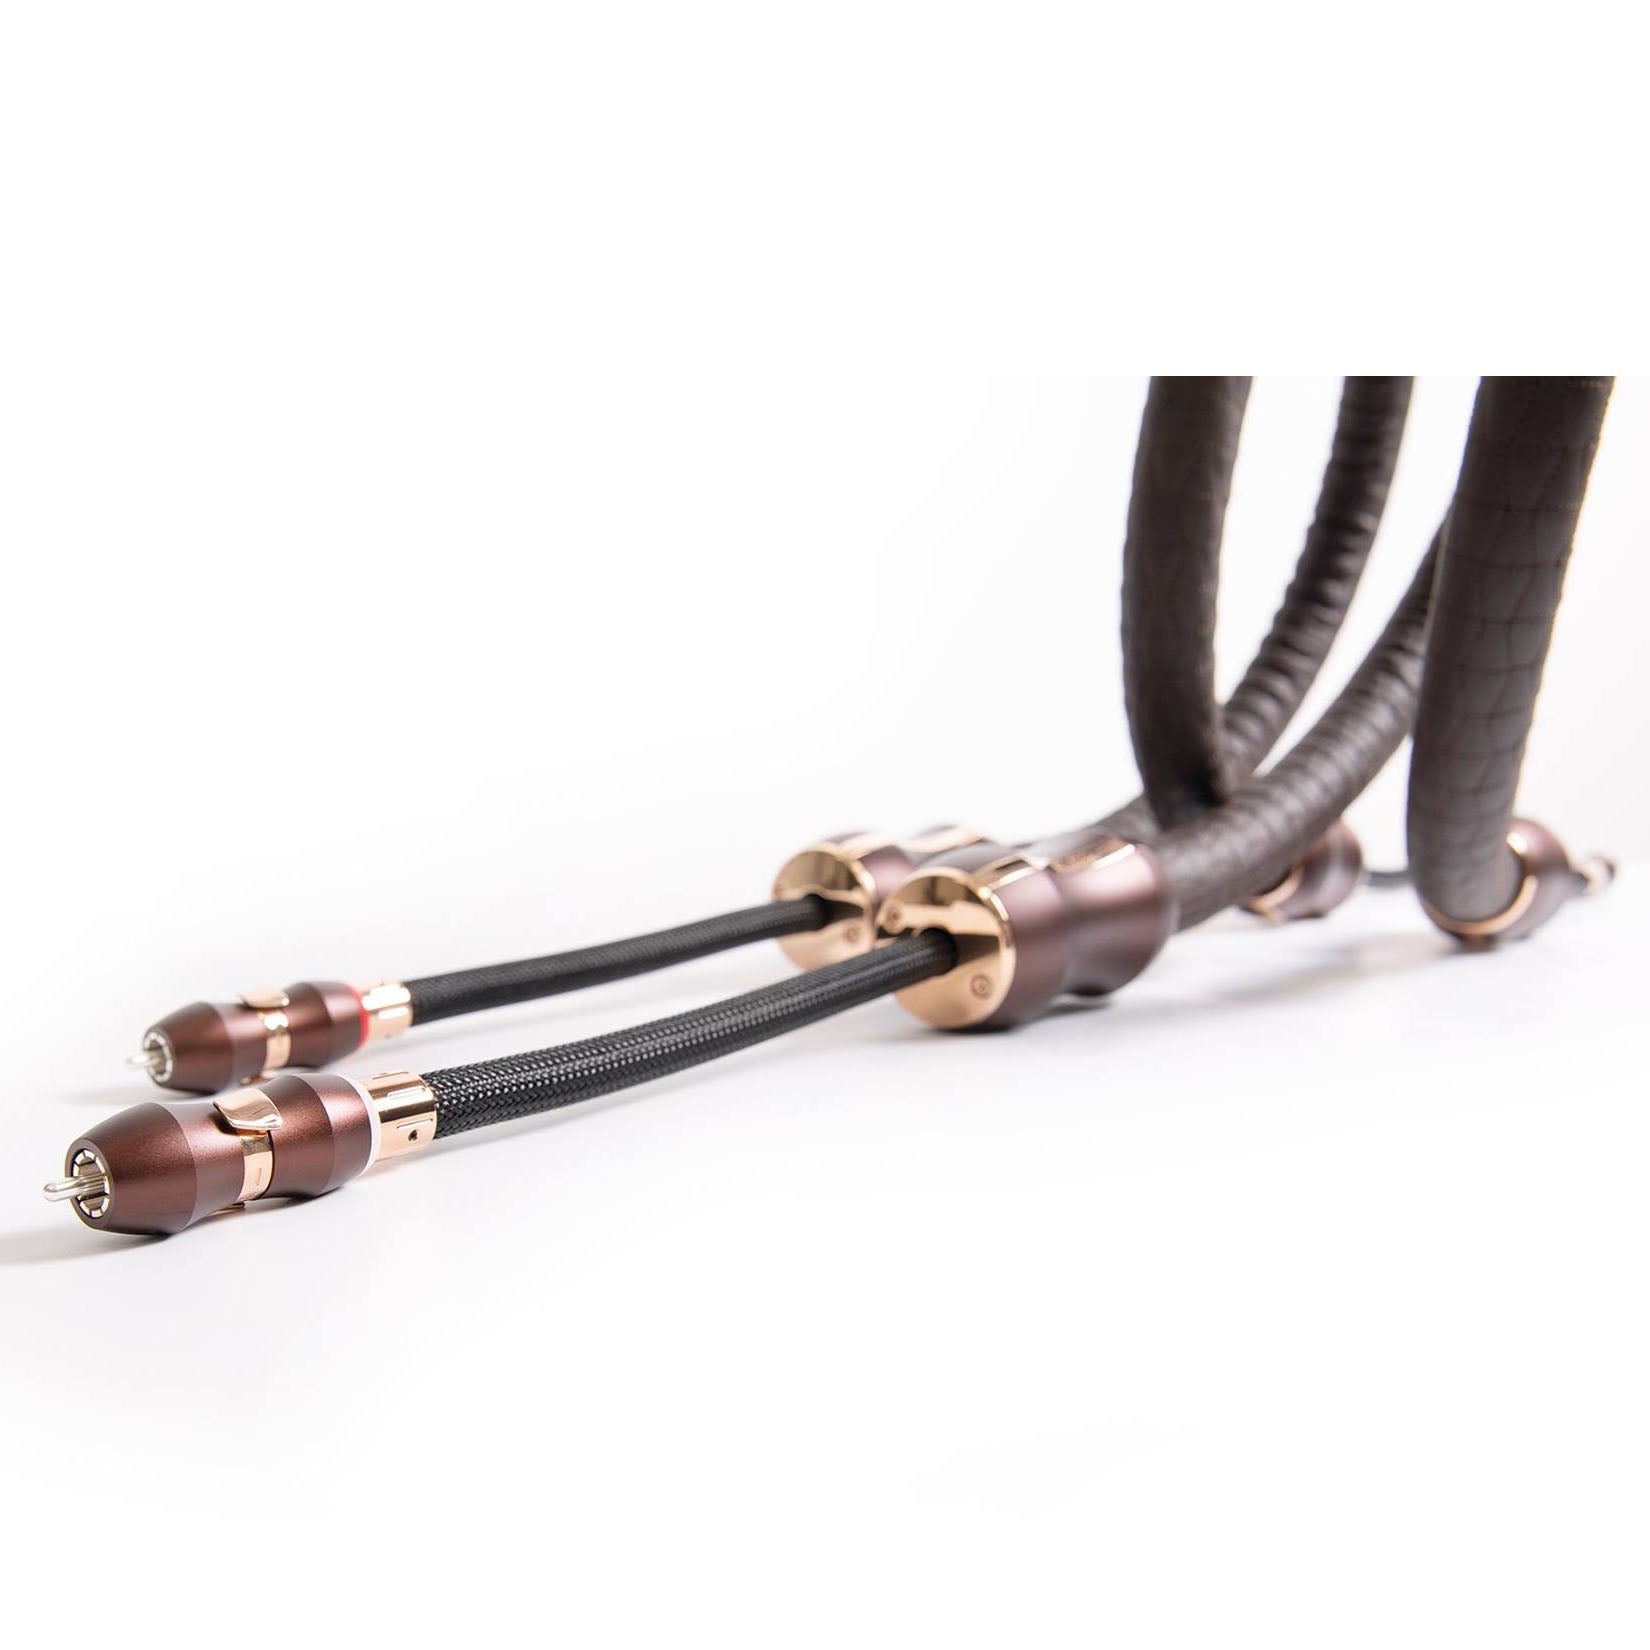 Kharma Enigma Veyron Analogue Interconnect Cable (pair)